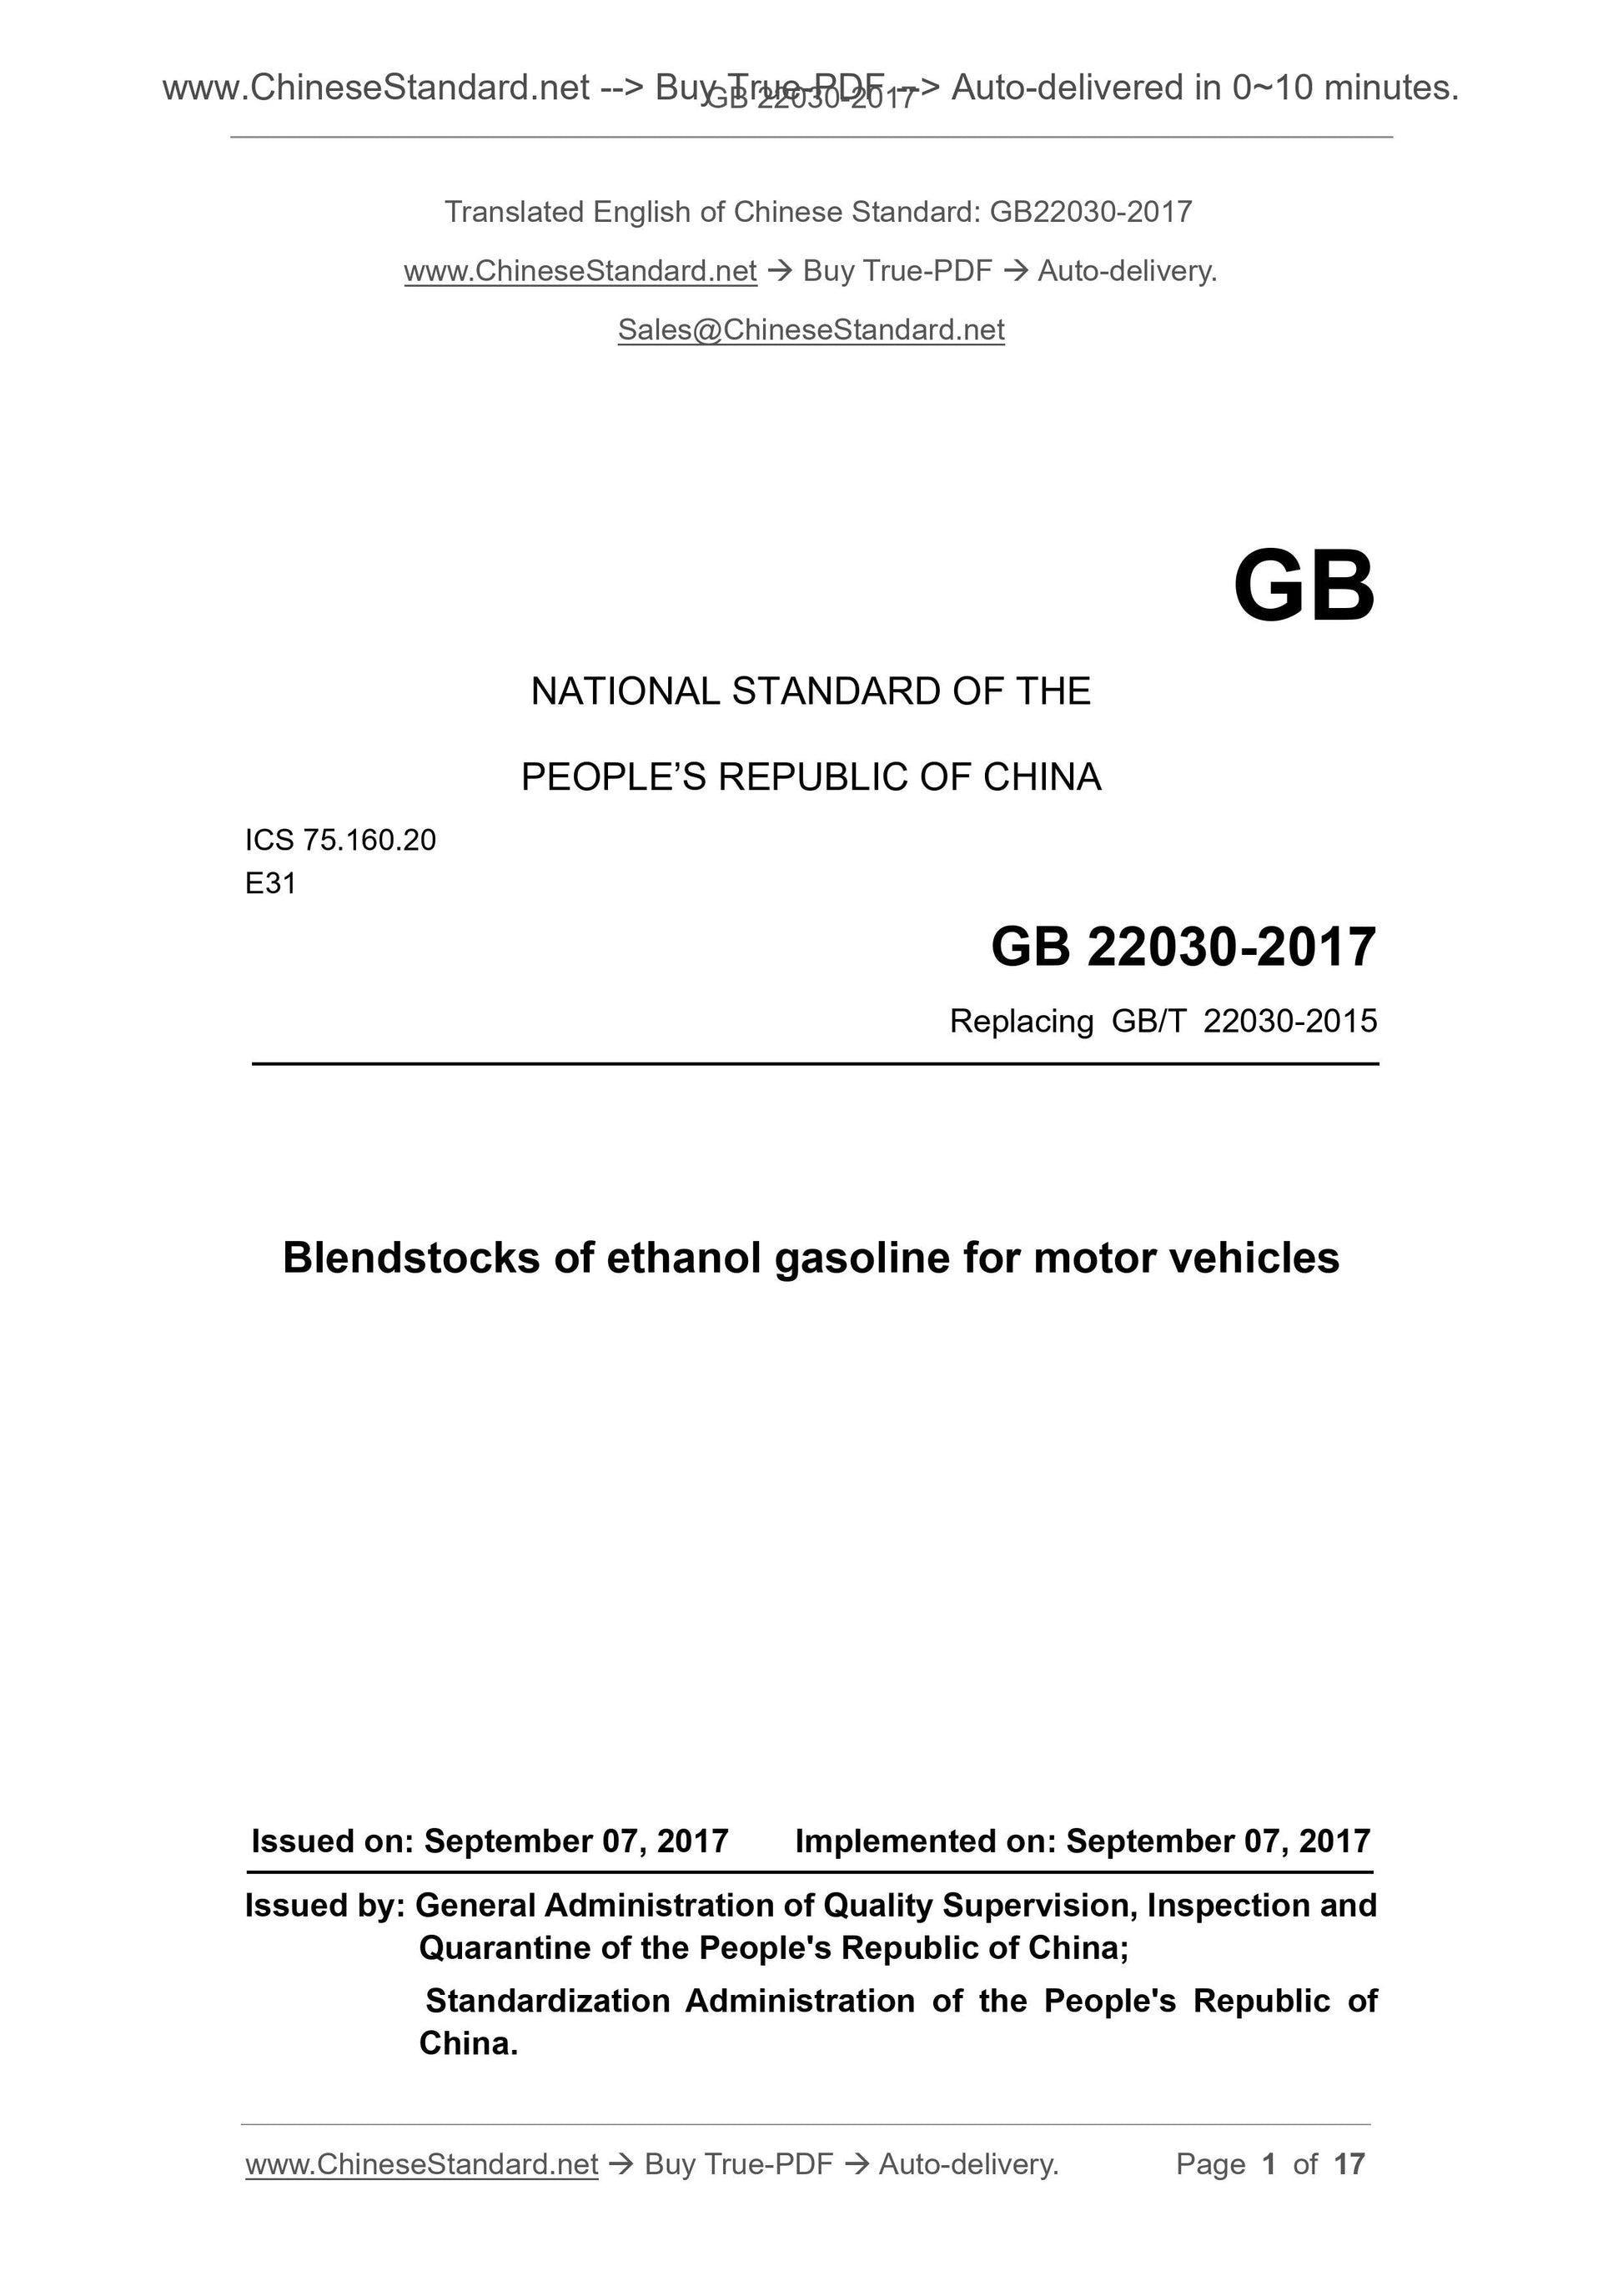 GB 22030-2017 Page 1